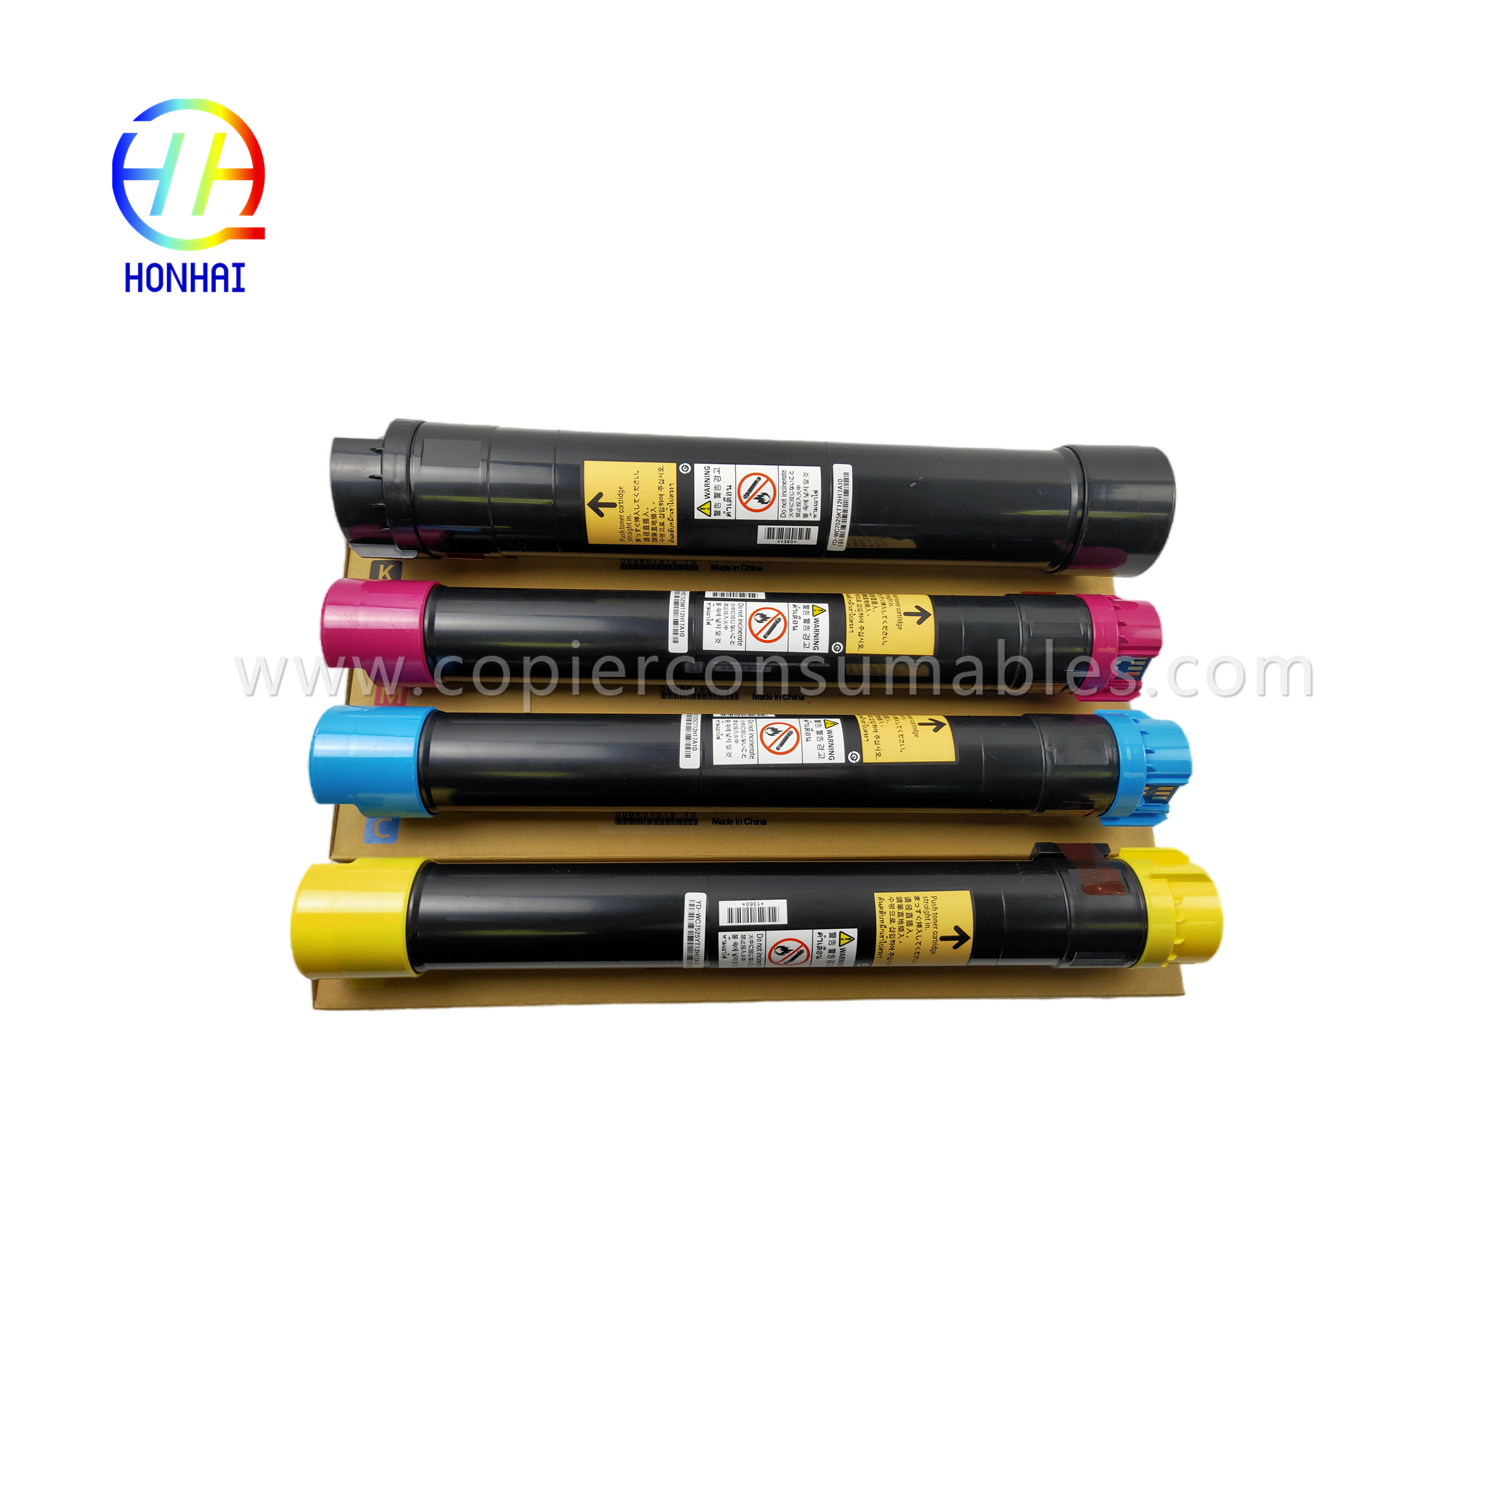 https://c585.goodao.net/toner-cartridge-imported-powder-set-bcmy-for-xerox-workcentre-7830-7835-7845-7855-7970-7525-7530-7535-7545-7556-0136 006r01514-006r01515-006r01516-پراڊڪٽ/